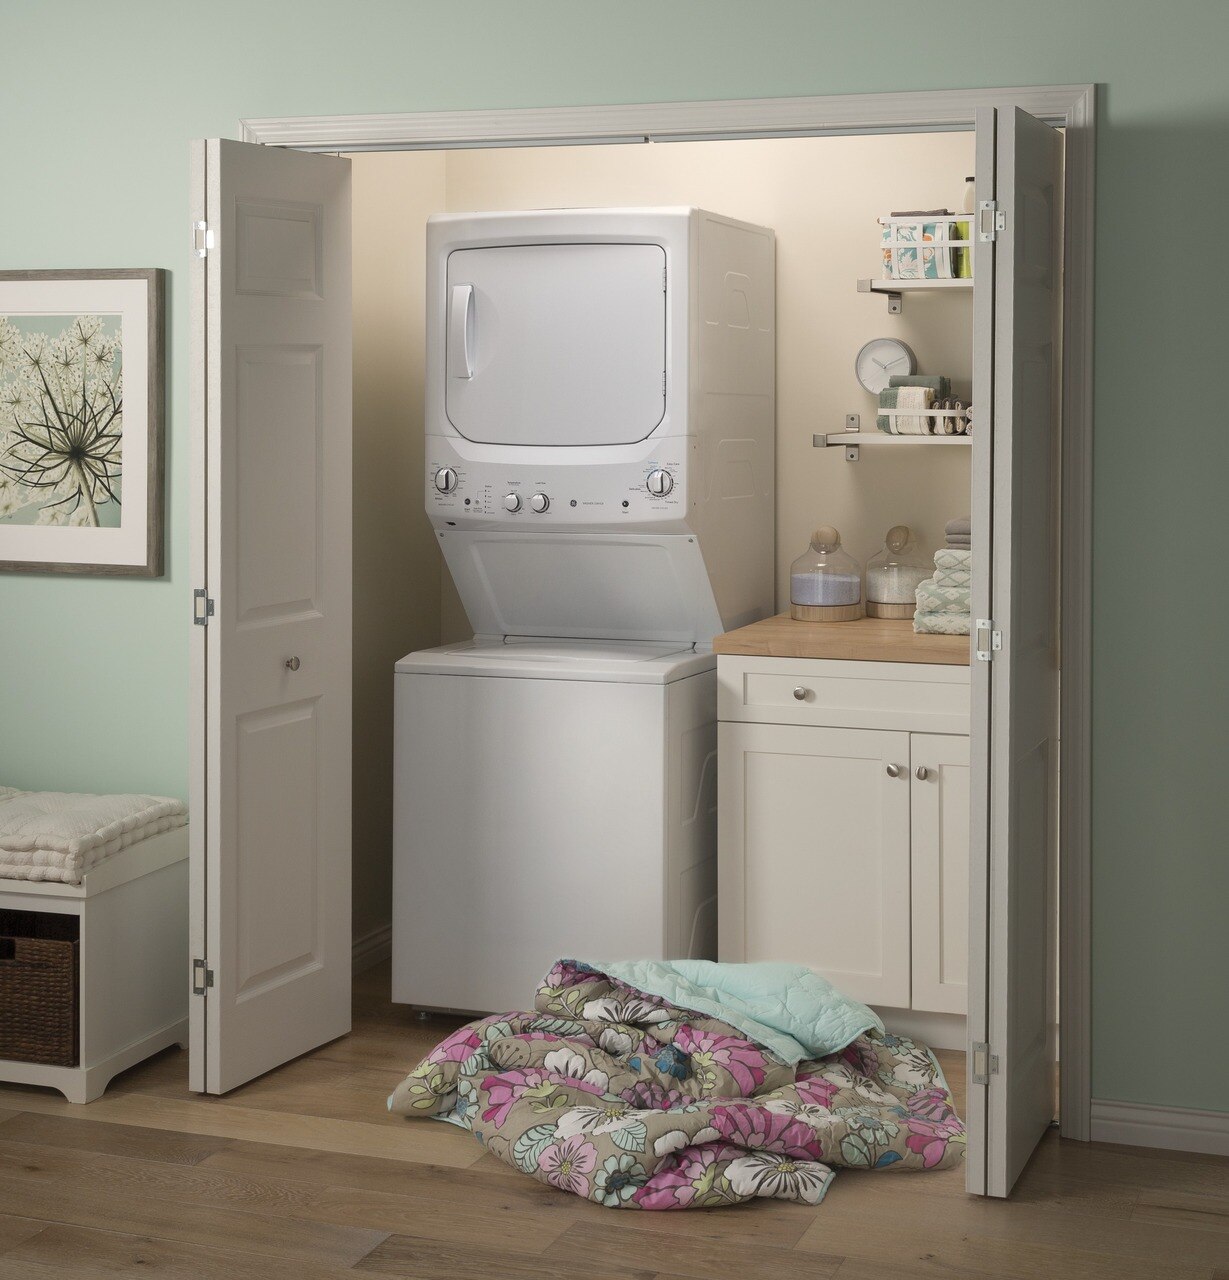 GE GUD27ESSMWW stacked washer dryer in a compact laundry closet 